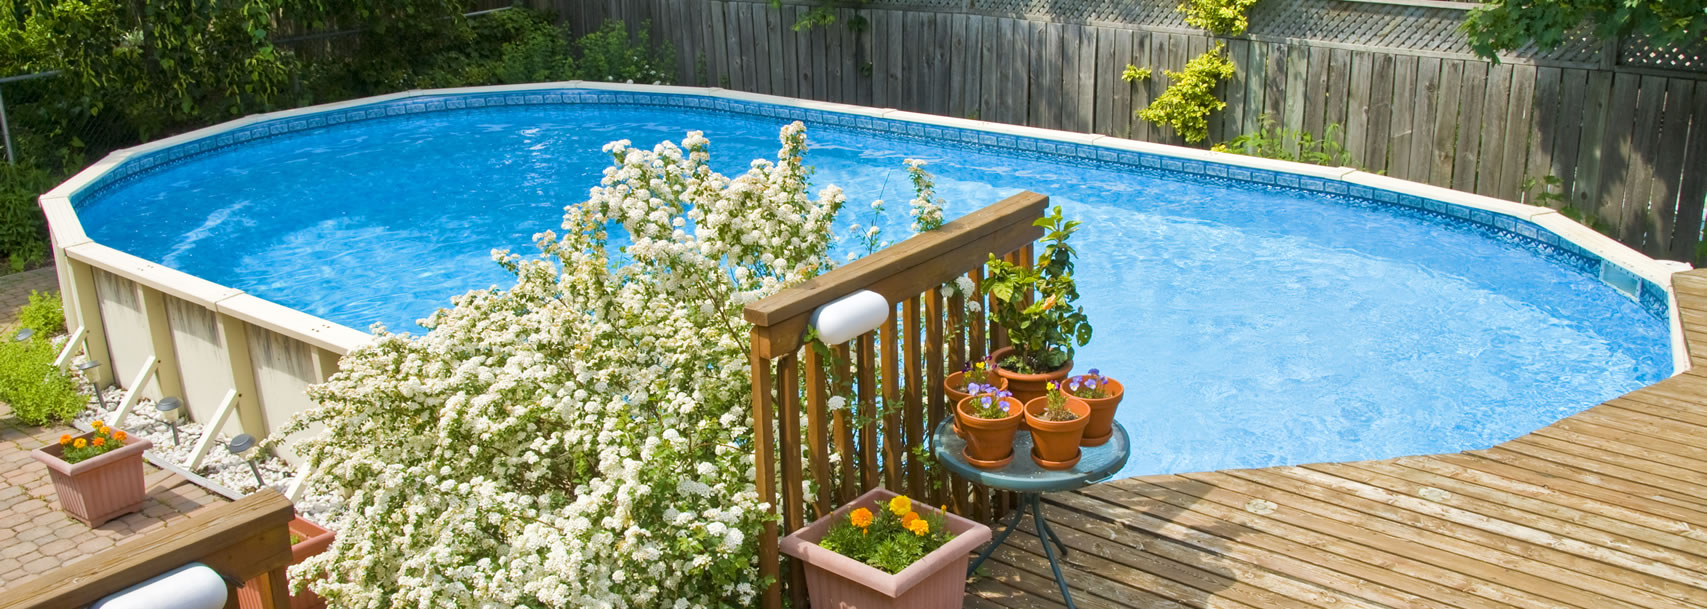 Installing an Over Ground Pool for Your Home